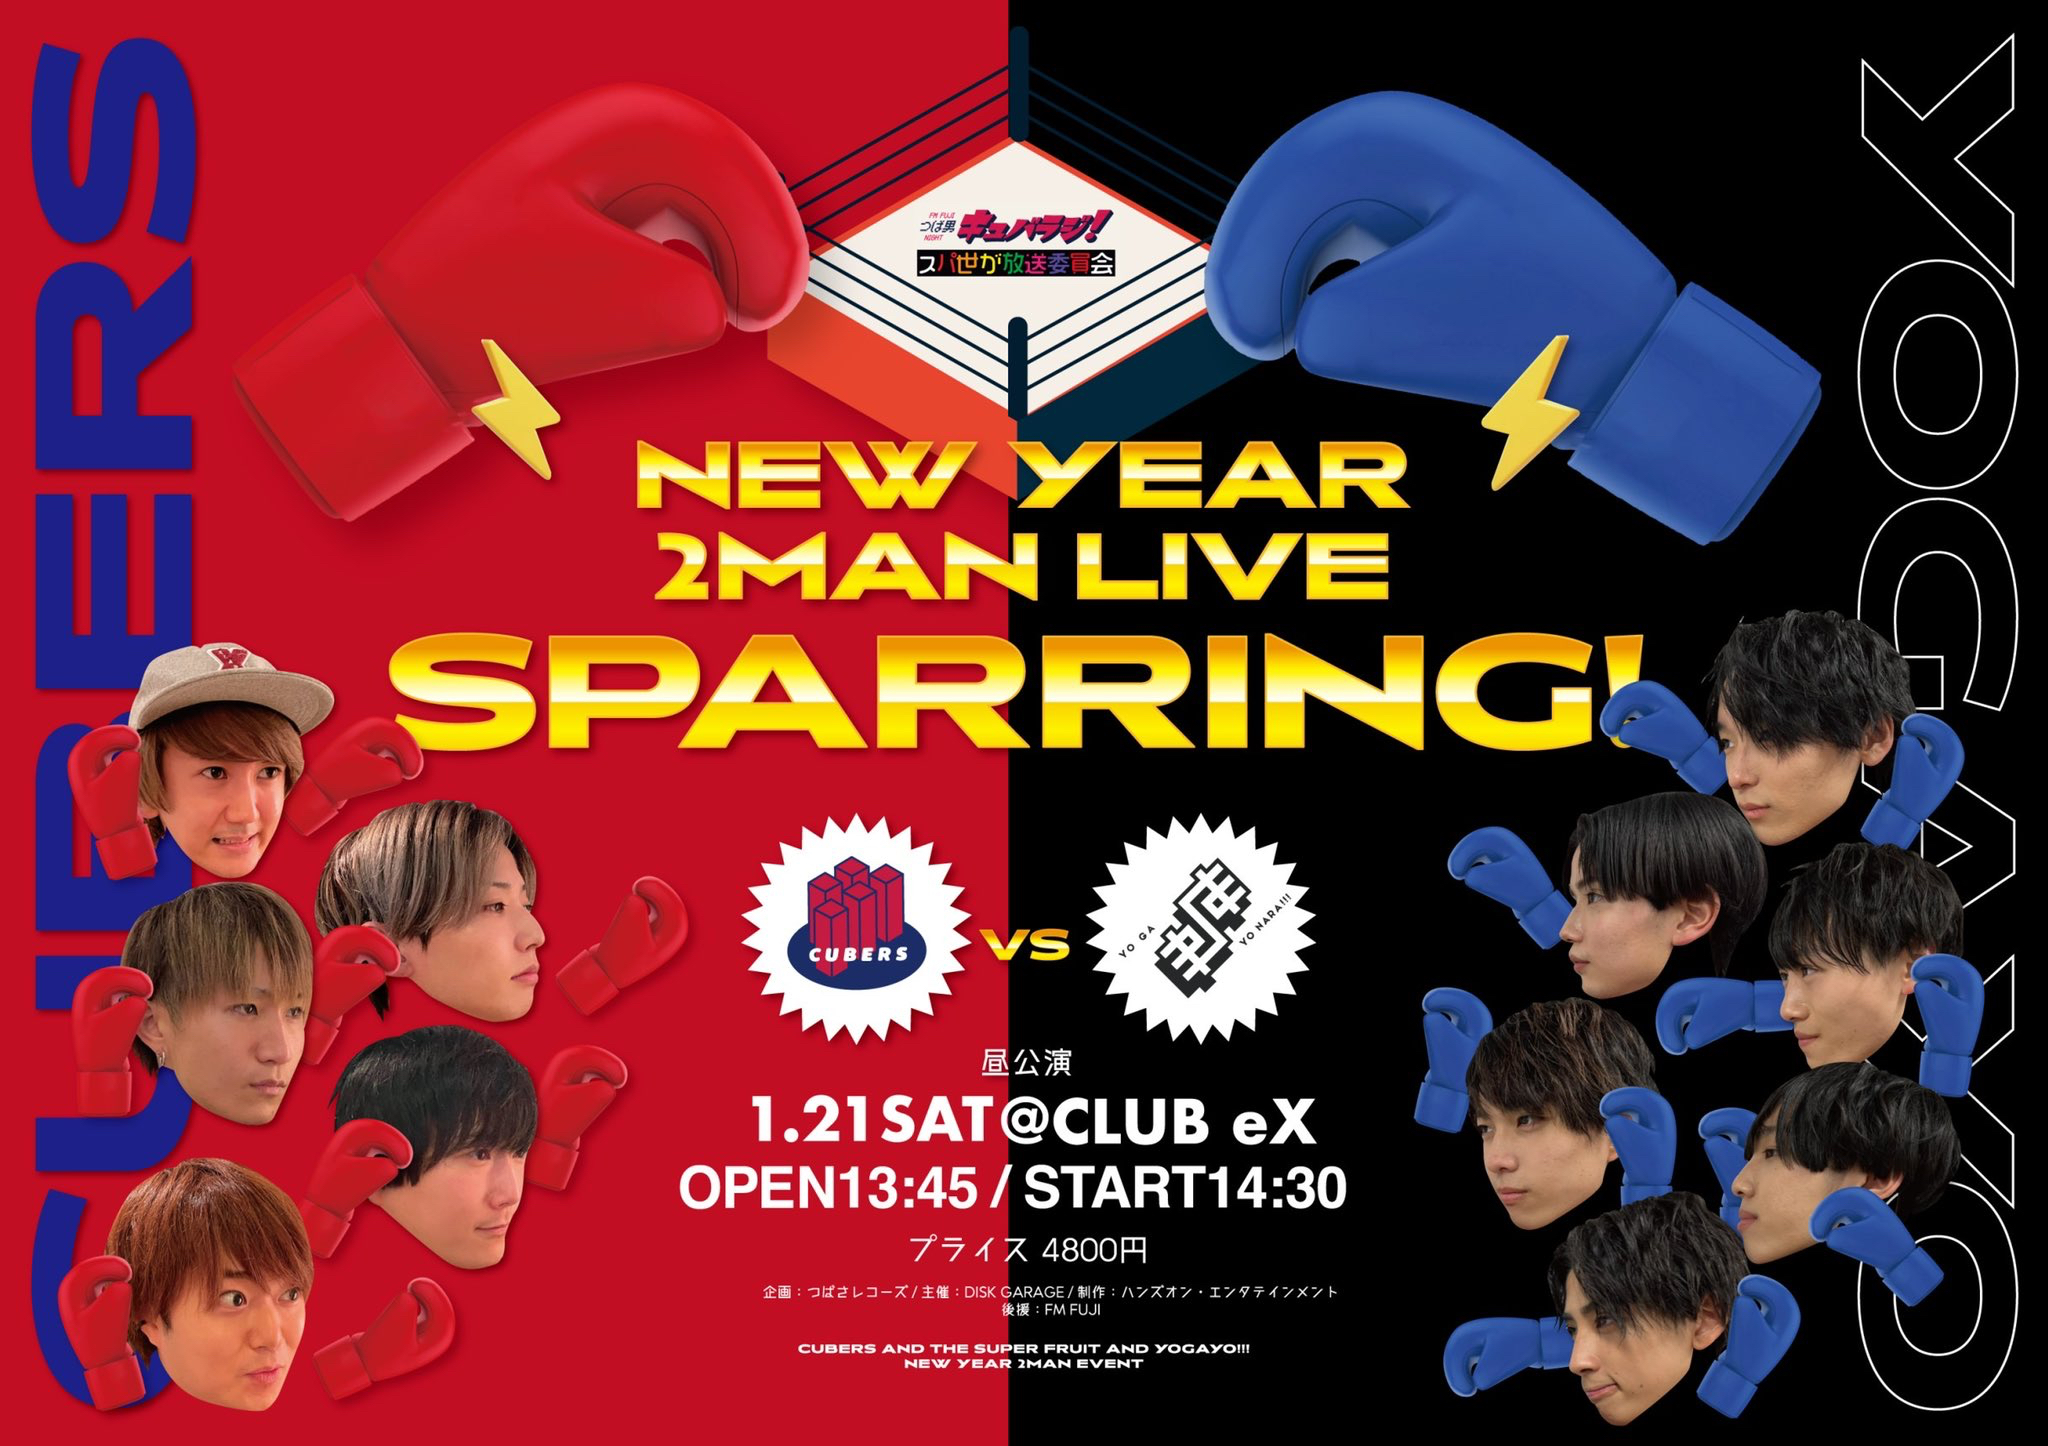 【NEWS】1月21日(土)開催”FM FUJI つば男NIGHT presents”「New Year 2Man Live Sparring  CUBERS × 世が世なら!!!」生配信決定！